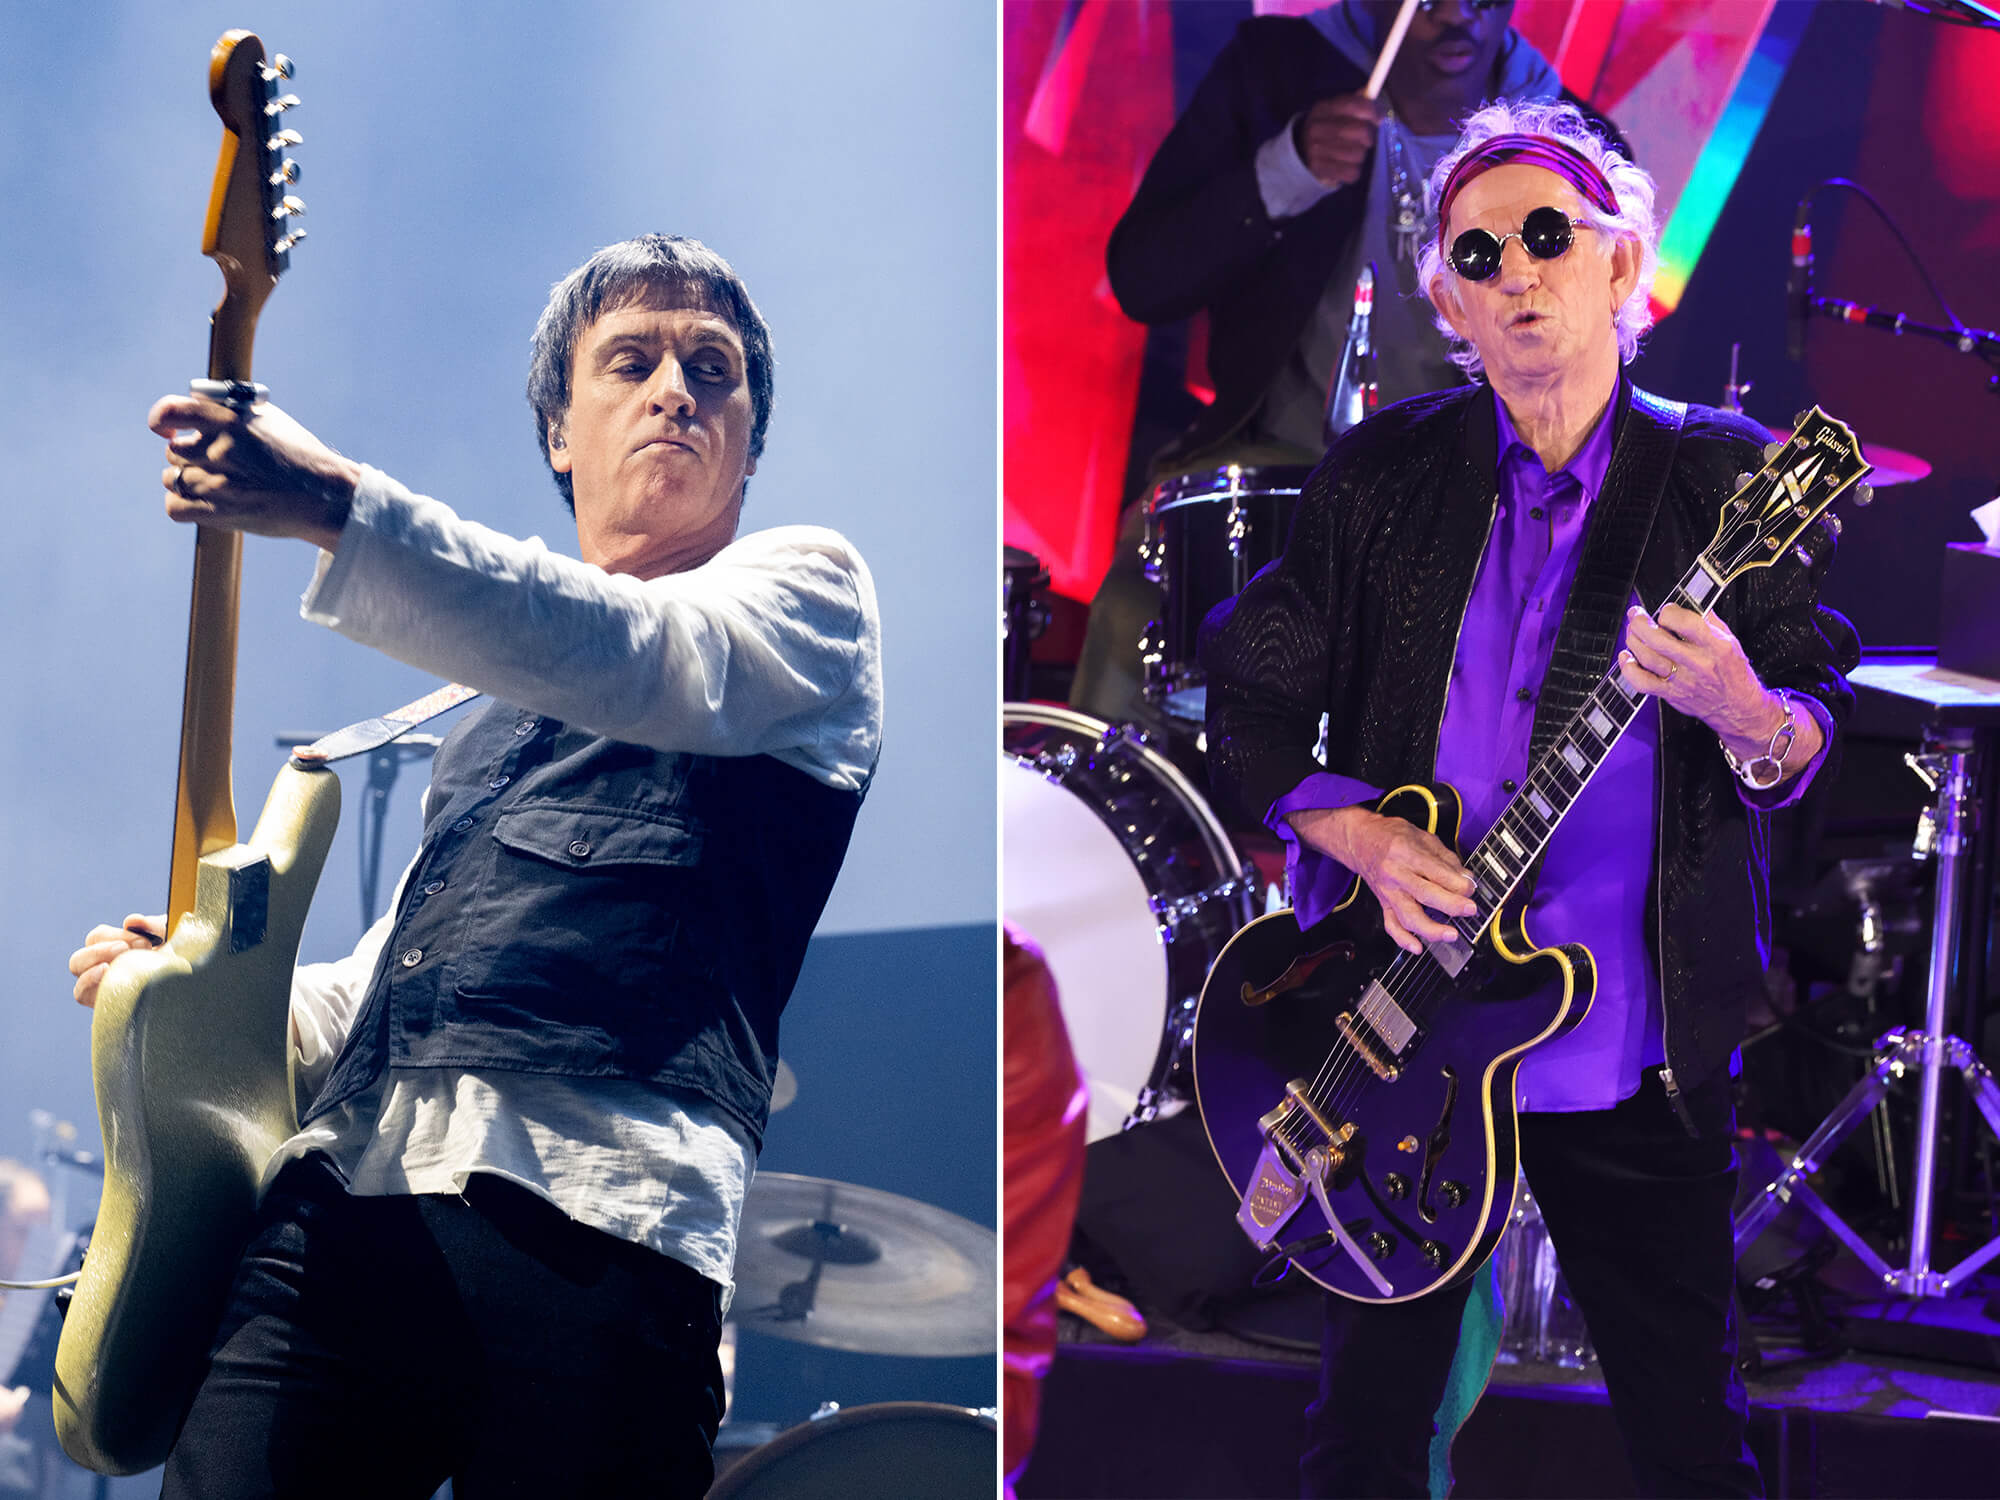 Johnny Marr (left) playing guitar. He is lifting the guitar out to the side and is looking over his shoulder with a stern expression. Keith Richards (right) playing guitar on stage. He is wearing shades and is pouting.